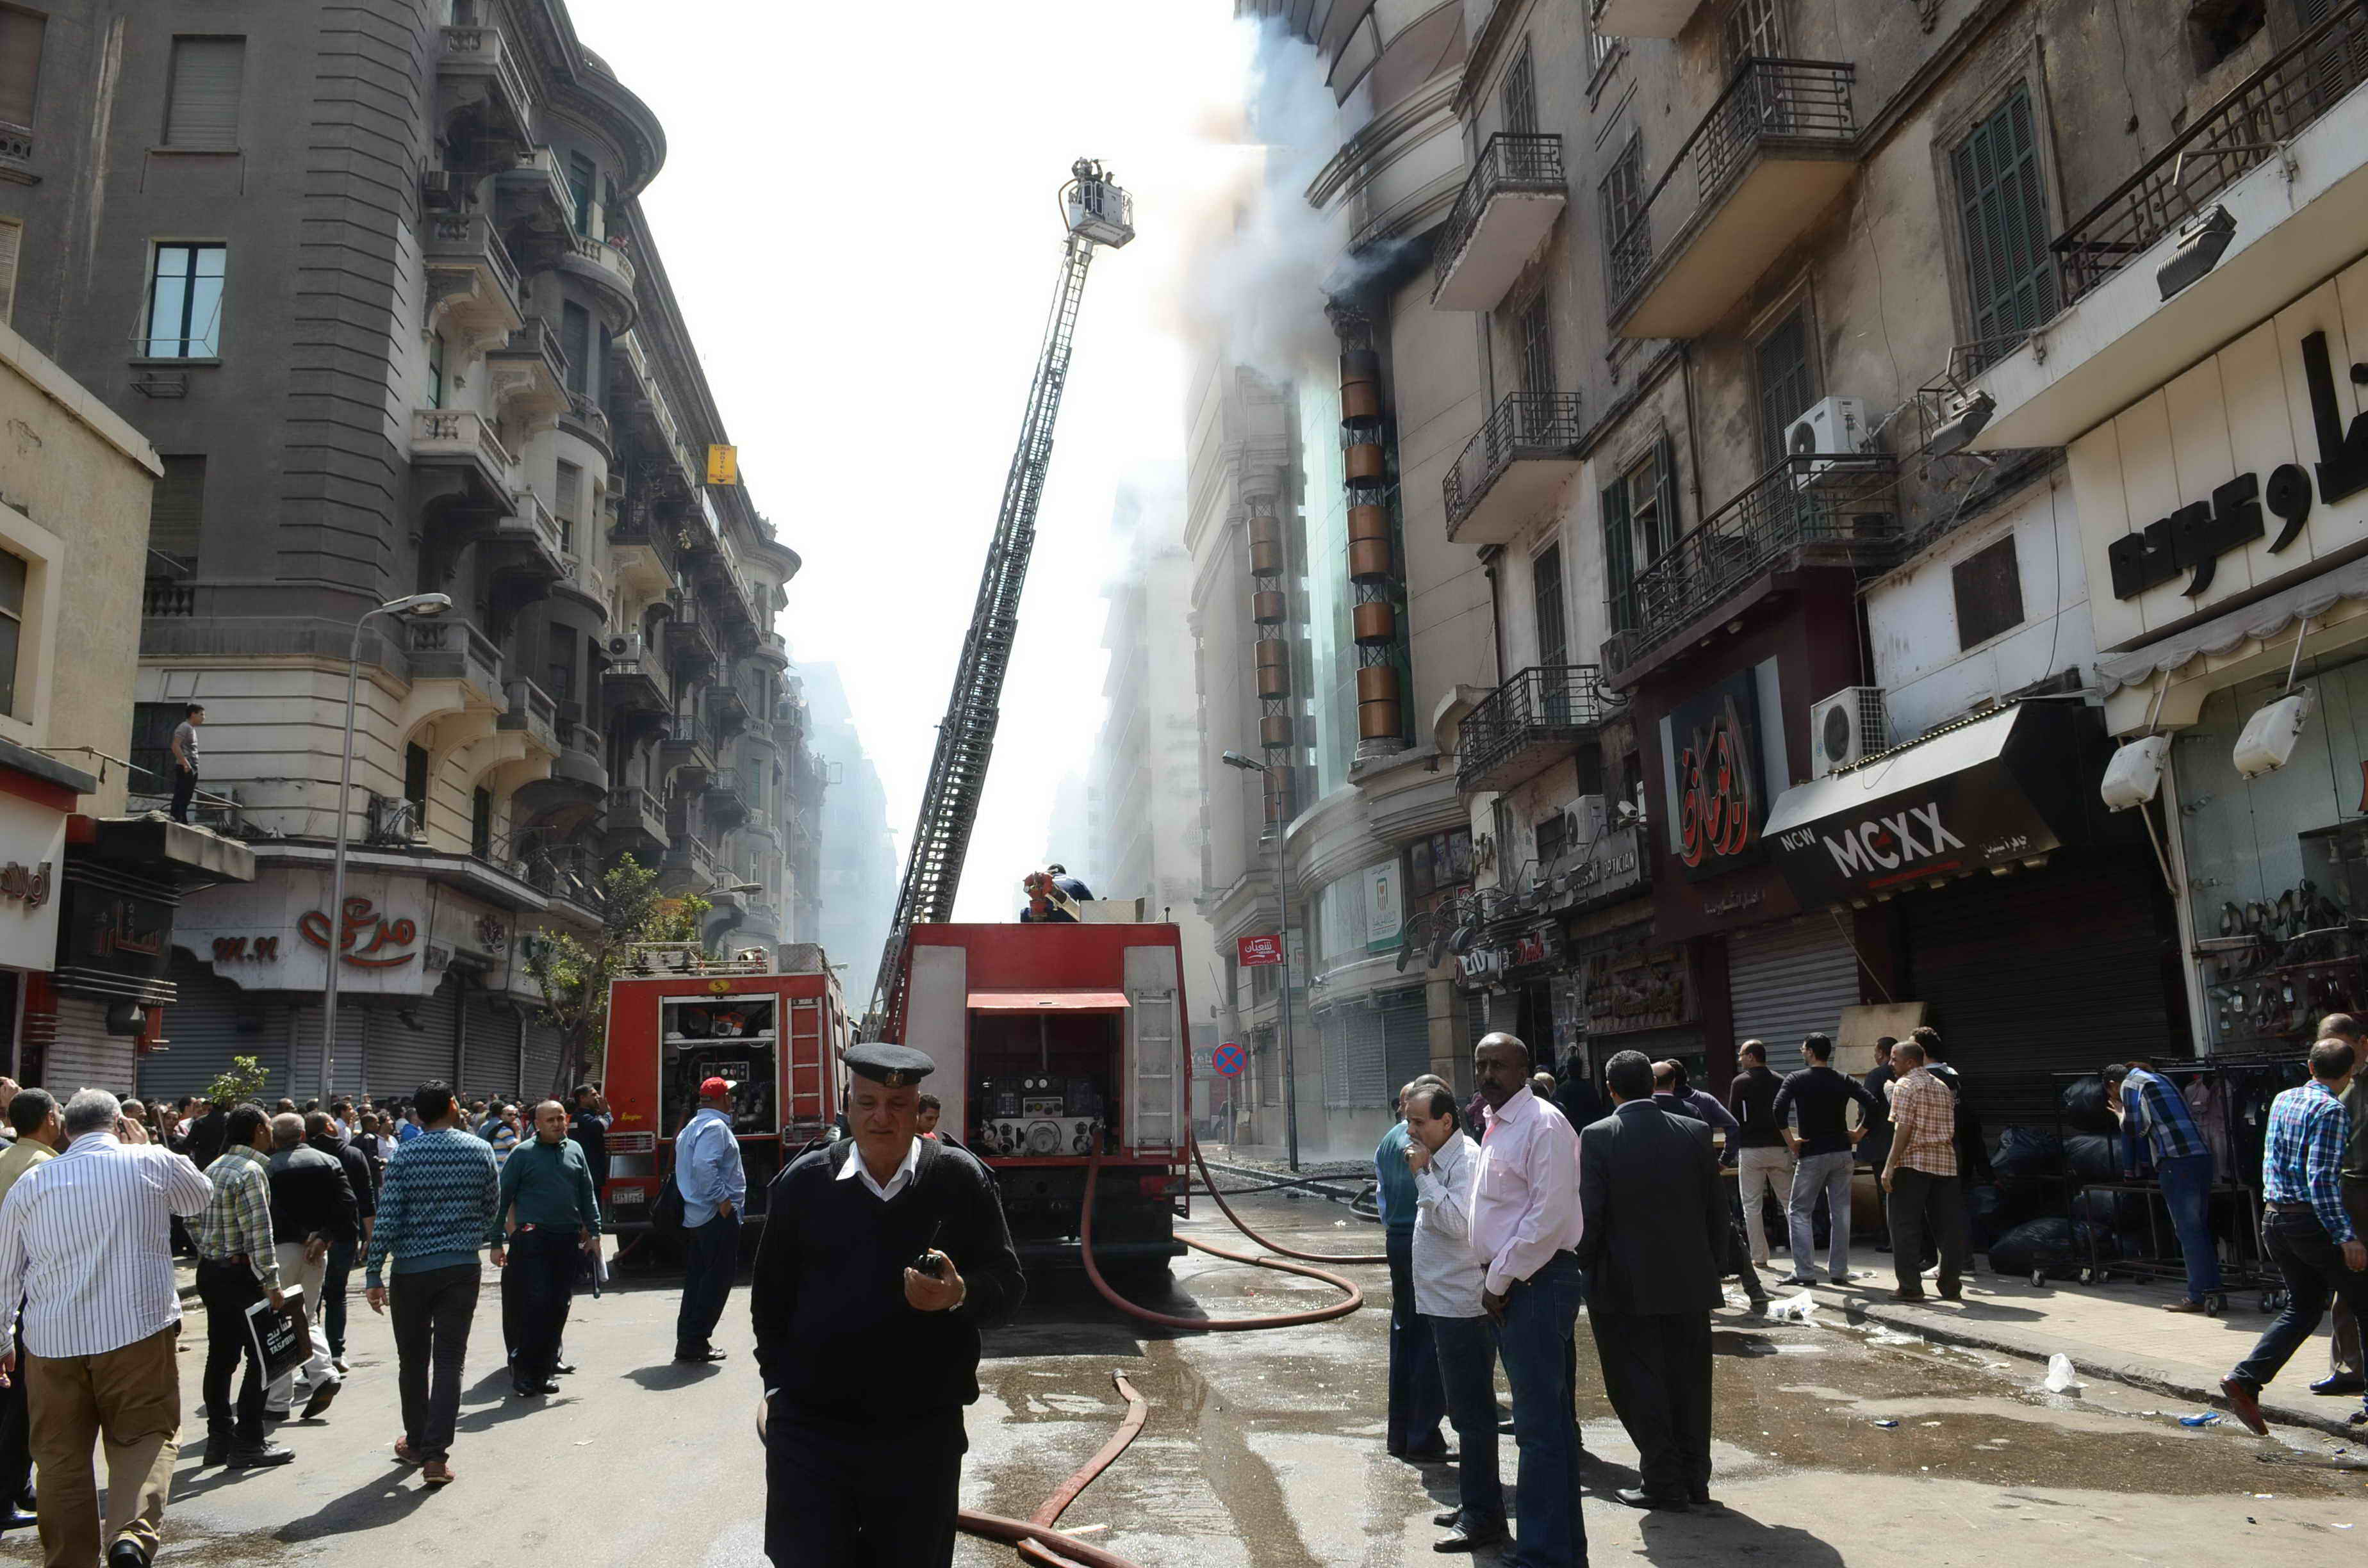 agujas del reloj a tiempo Abundante In Pictures: Talaat Harb mall goes up in flames - Dailynewsegypt